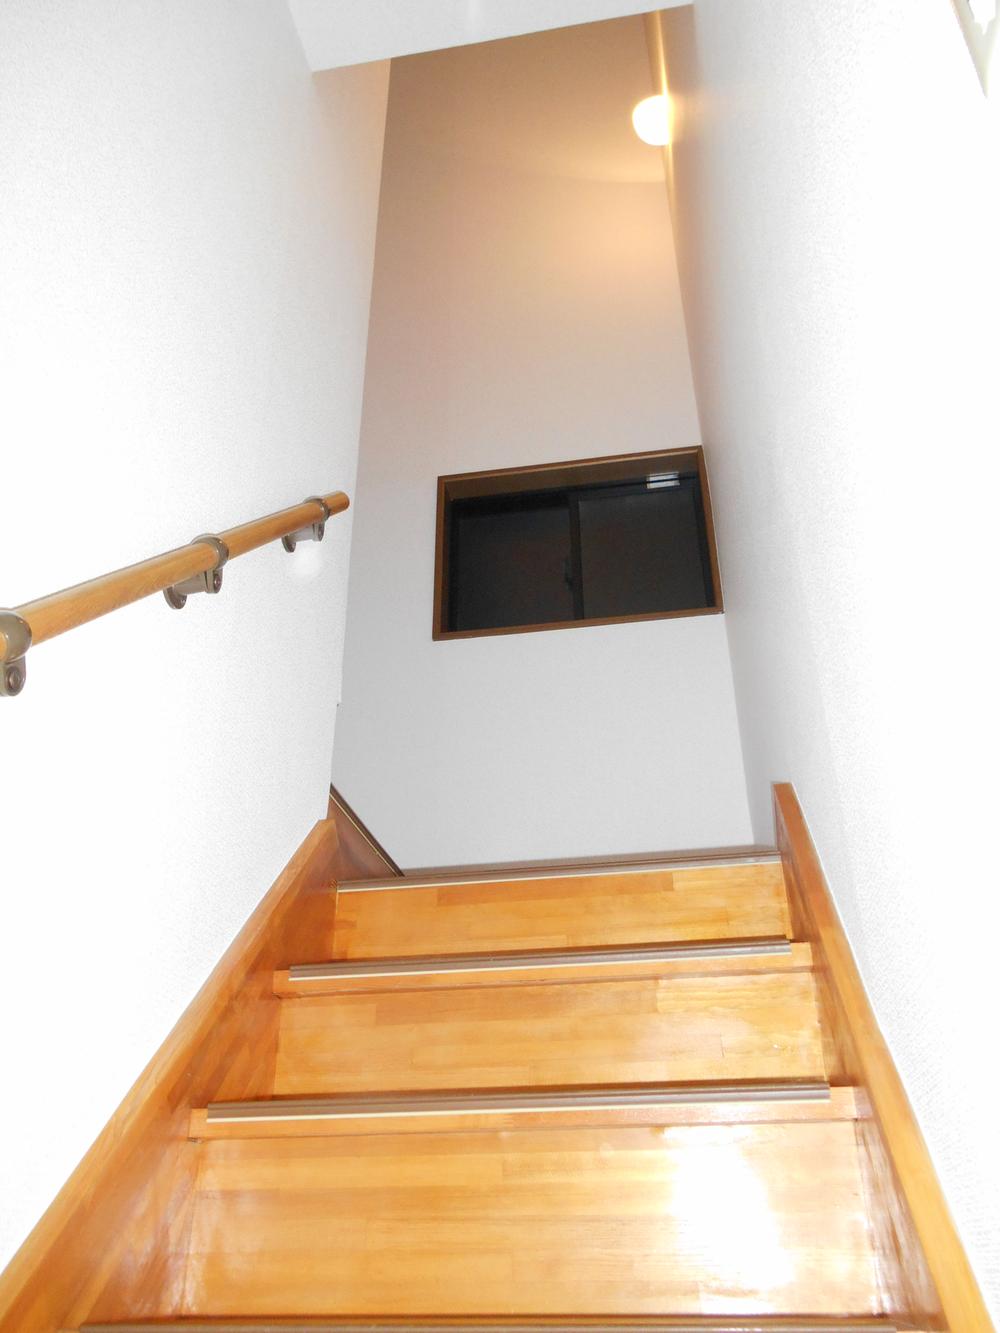 Other introspection. Stairs from the second floor to the third floor